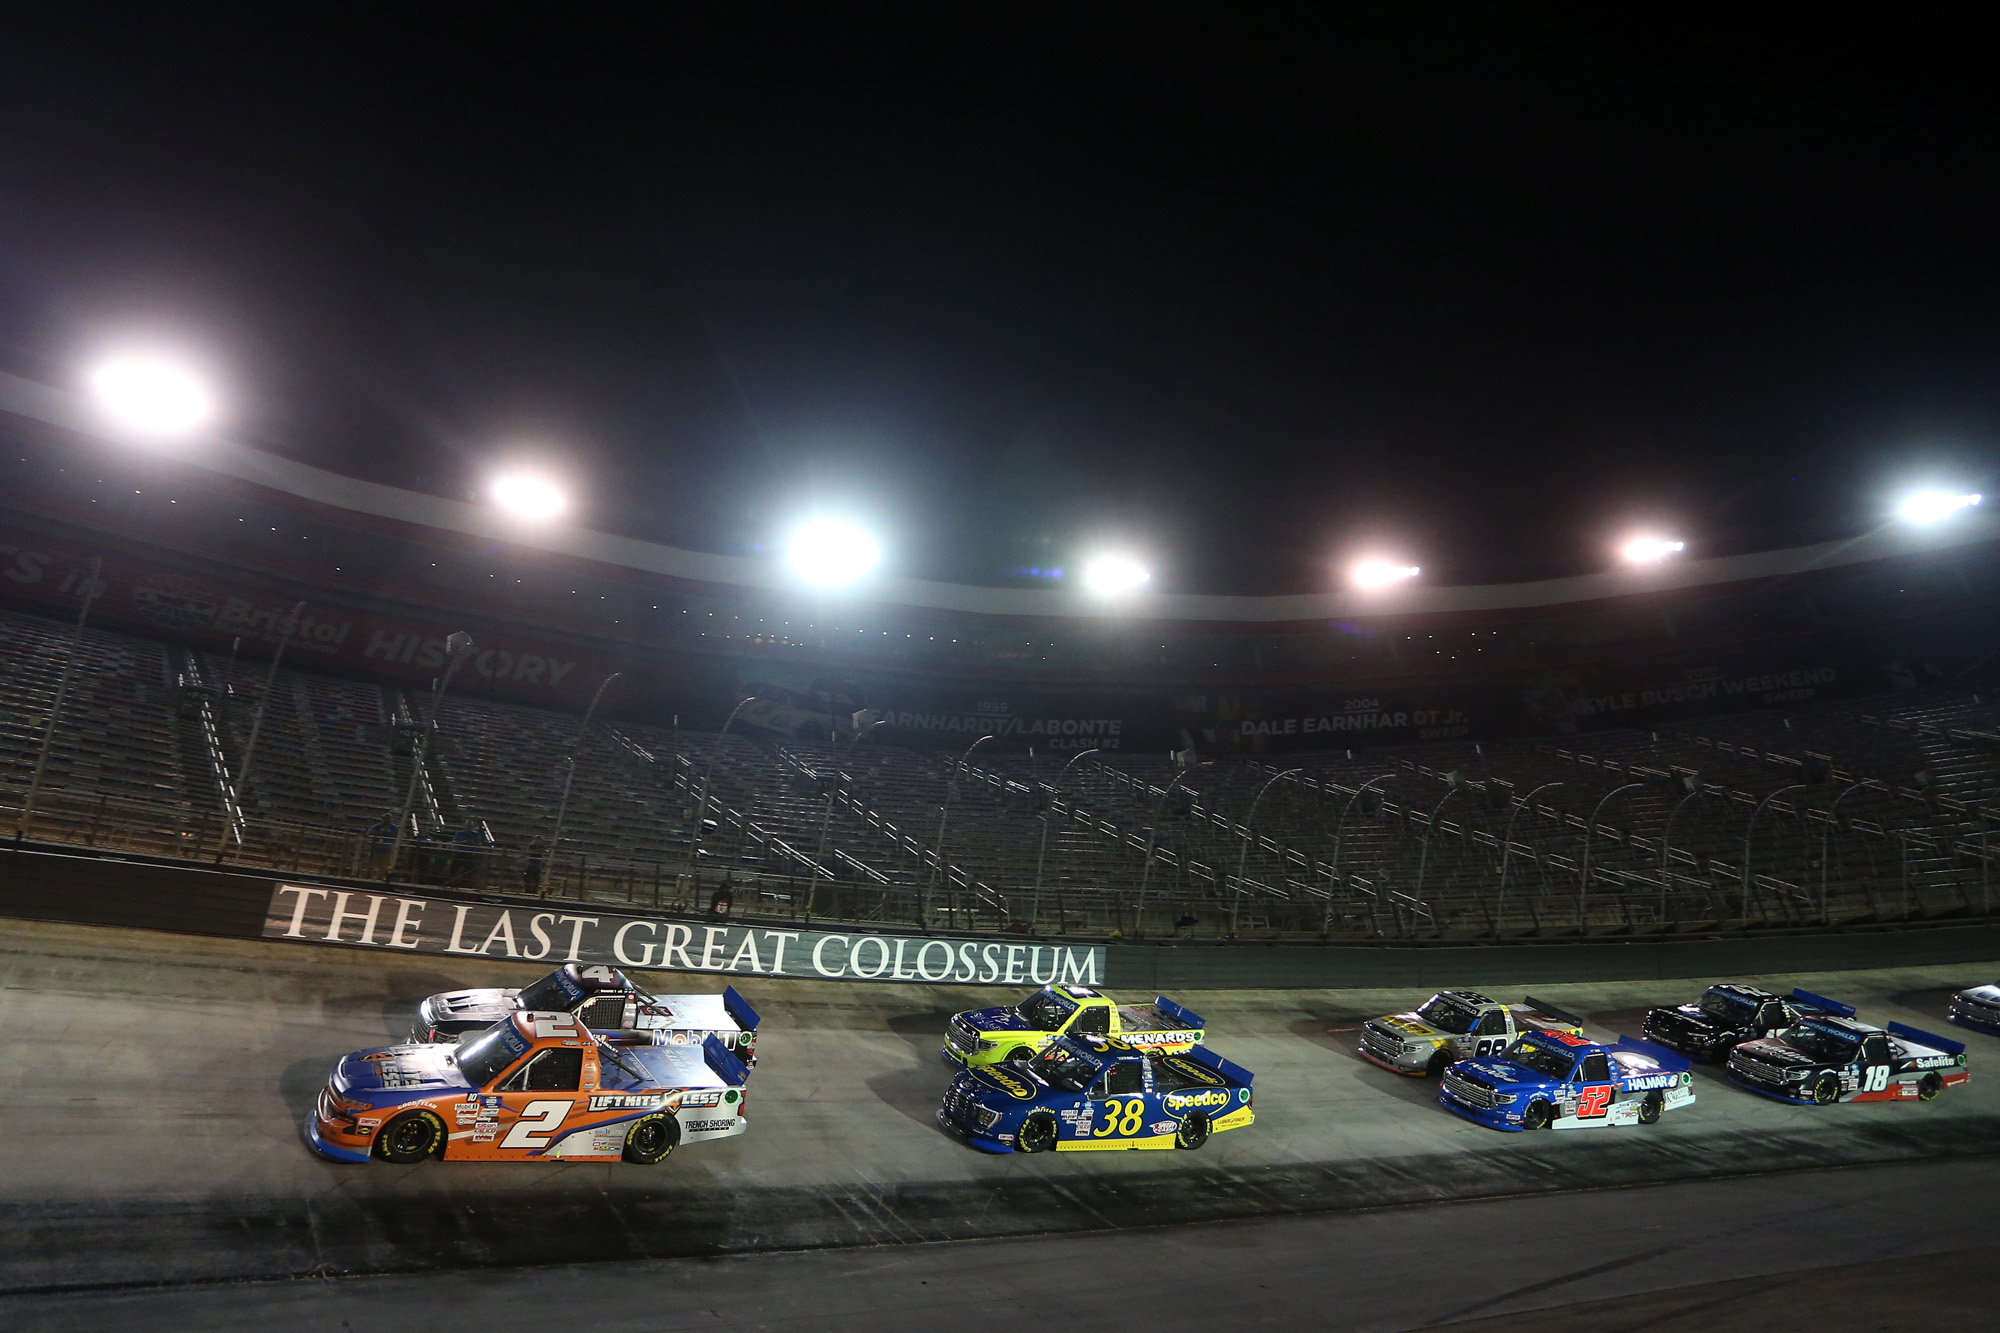 NASCAR Camping World Truck Series UNOH 200 presented by Ohio Logistics